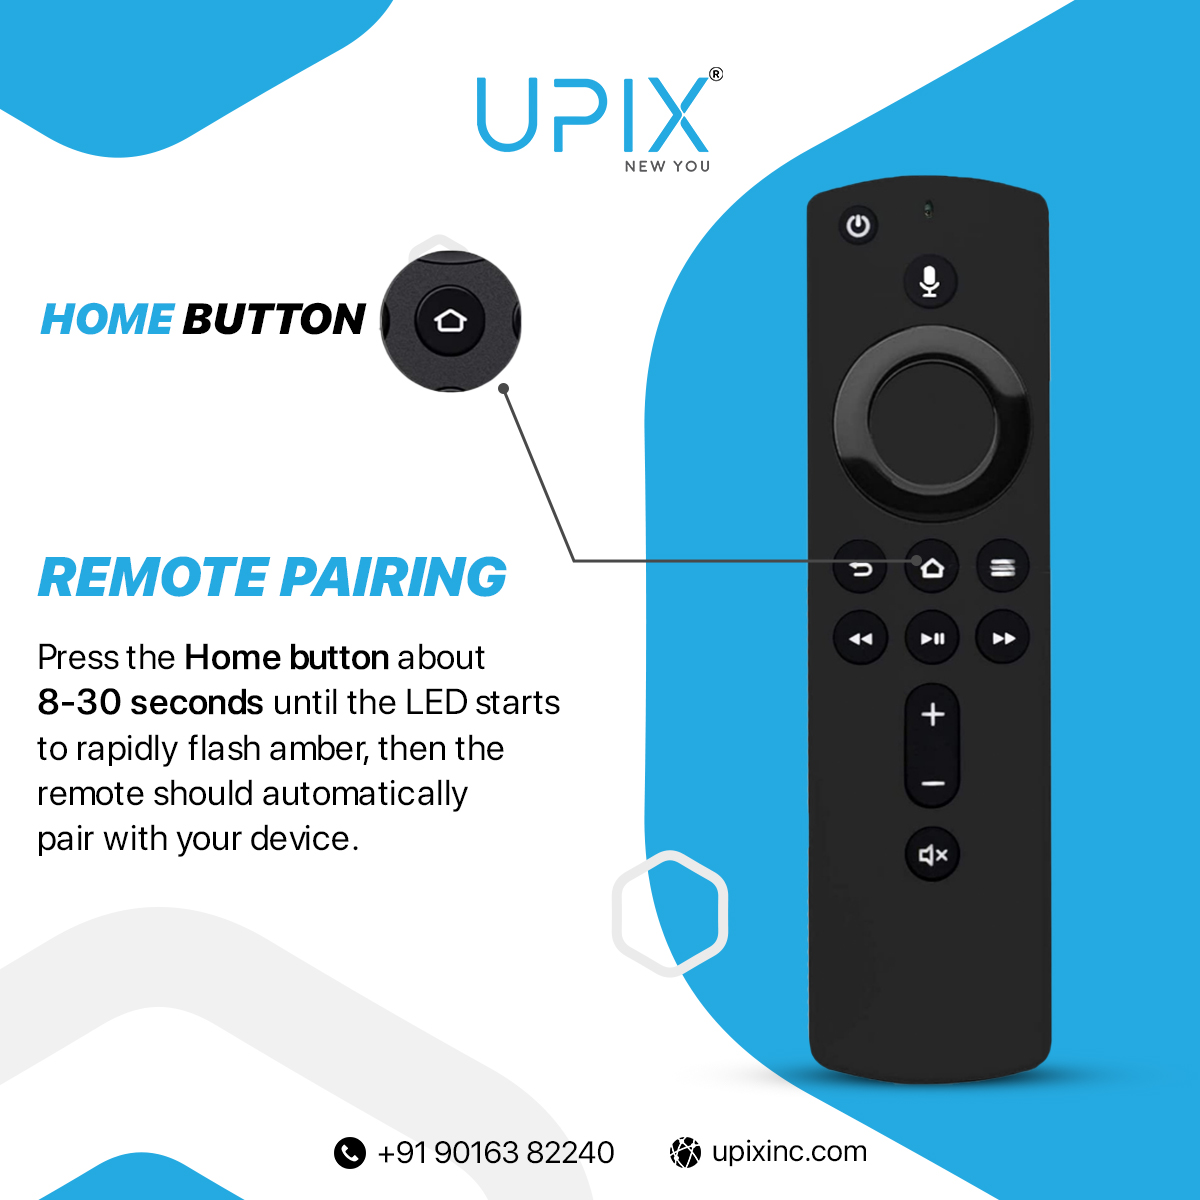 Seamless Connections Await! Elevate Your Experience with Effortless Remote Pairing📷. Stay Connected and in Control📷.
.
#upixinc #remotepairing #remotecontrol #wirelesscontroller #masteryourdevices #acremote #SimplifyYourLife #SimplifyYourLife #remotepower #modernliving